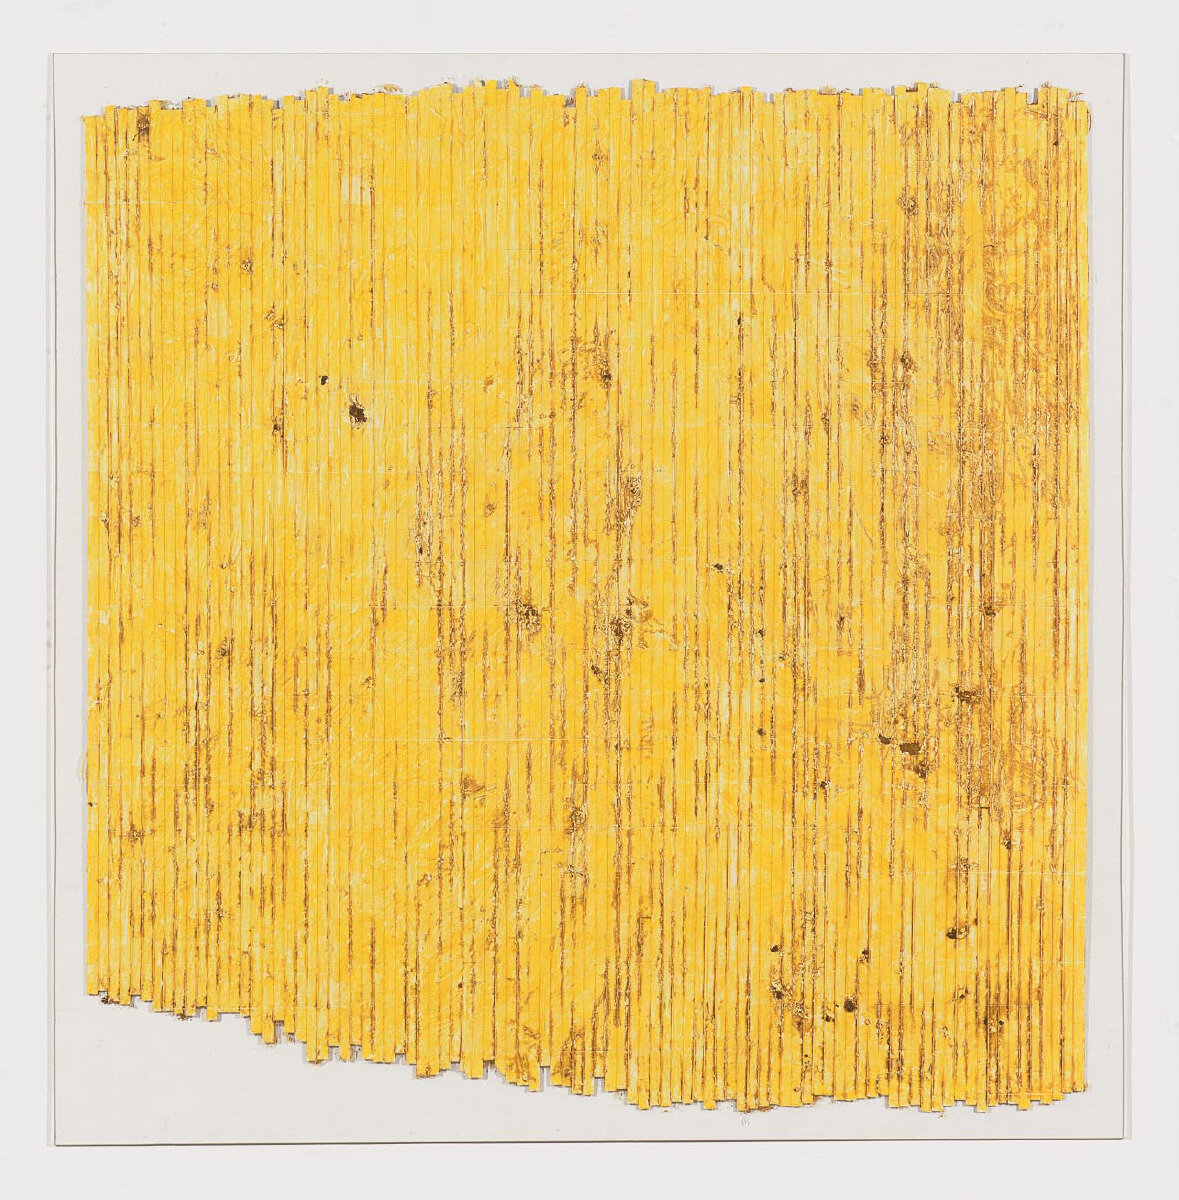  Untitled 2 of 2, 1978, 49 x 48 inches, pastel and tape on Plexiglass 